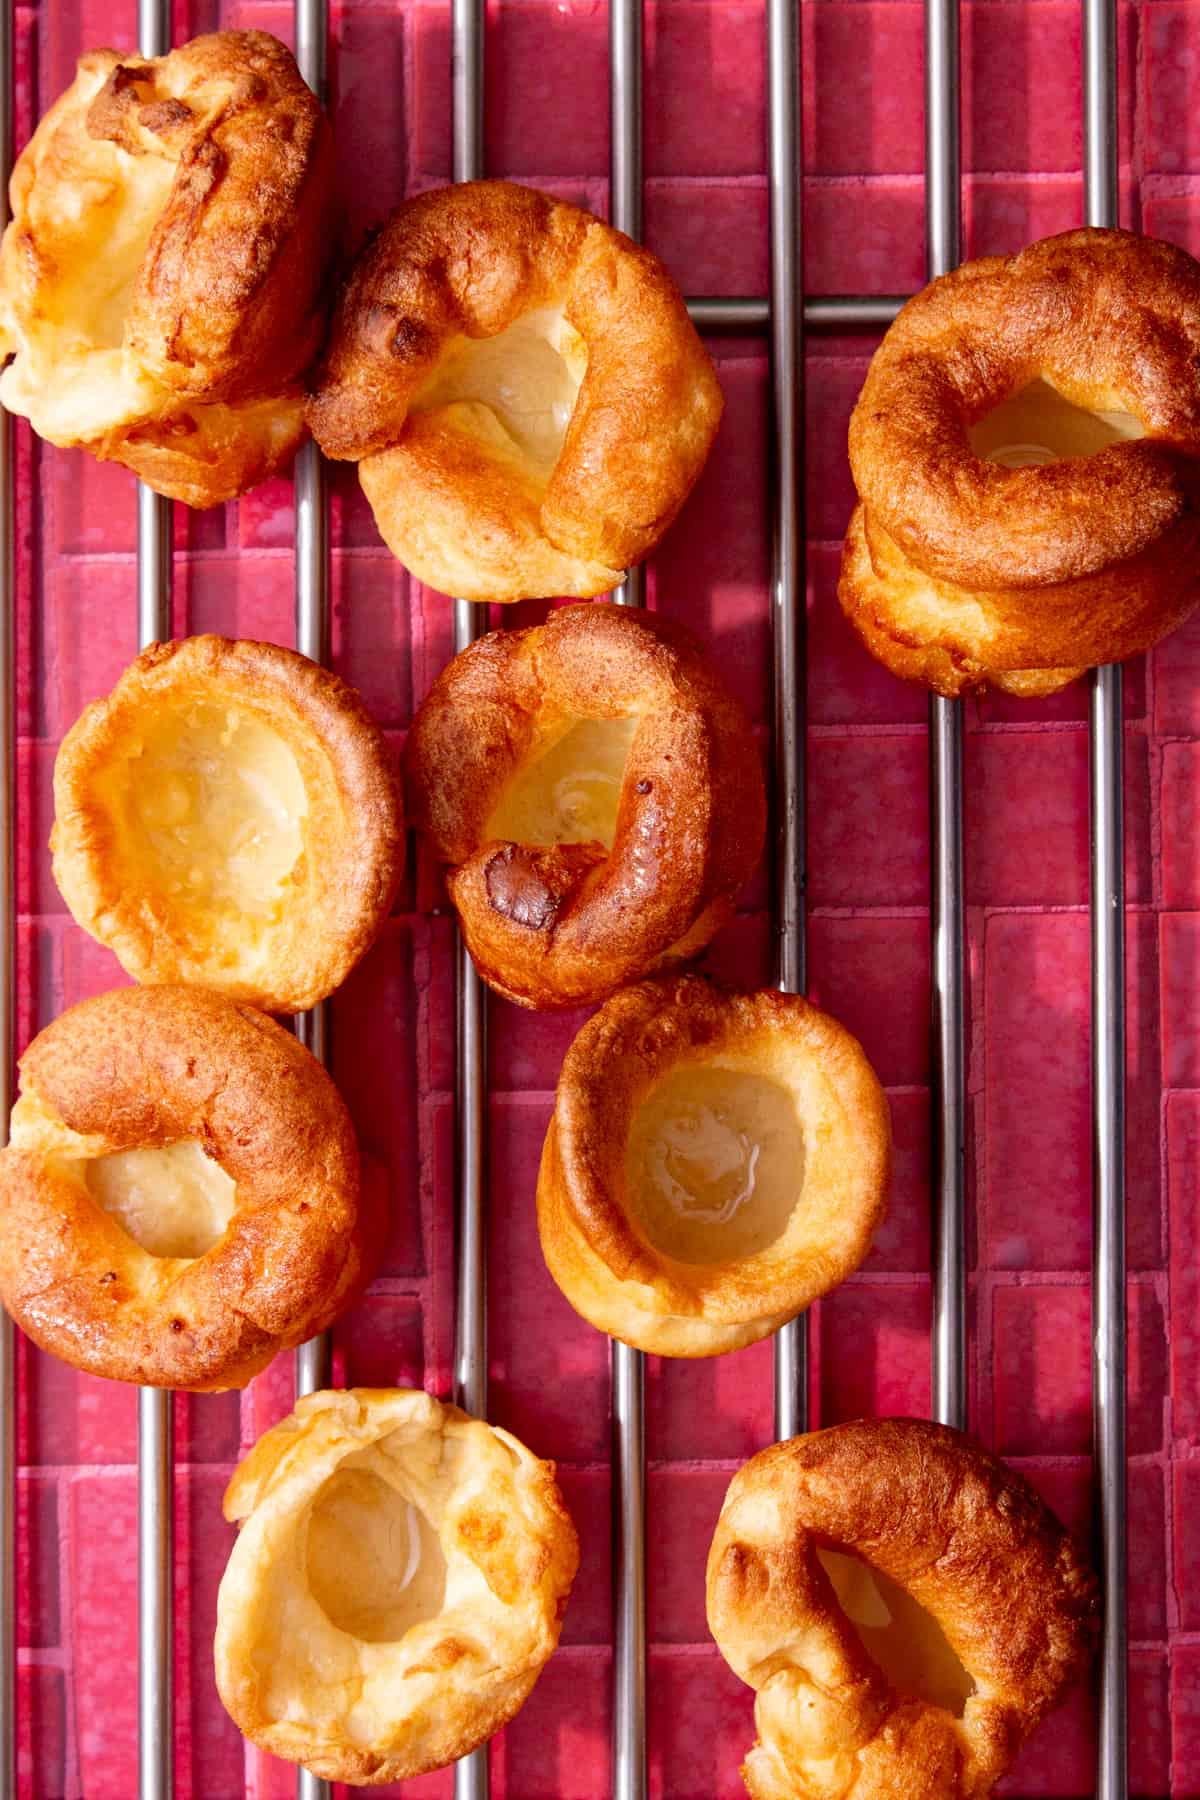 9 round, golden browned Yorkshire puddings on a metal rack of a dark pink background.